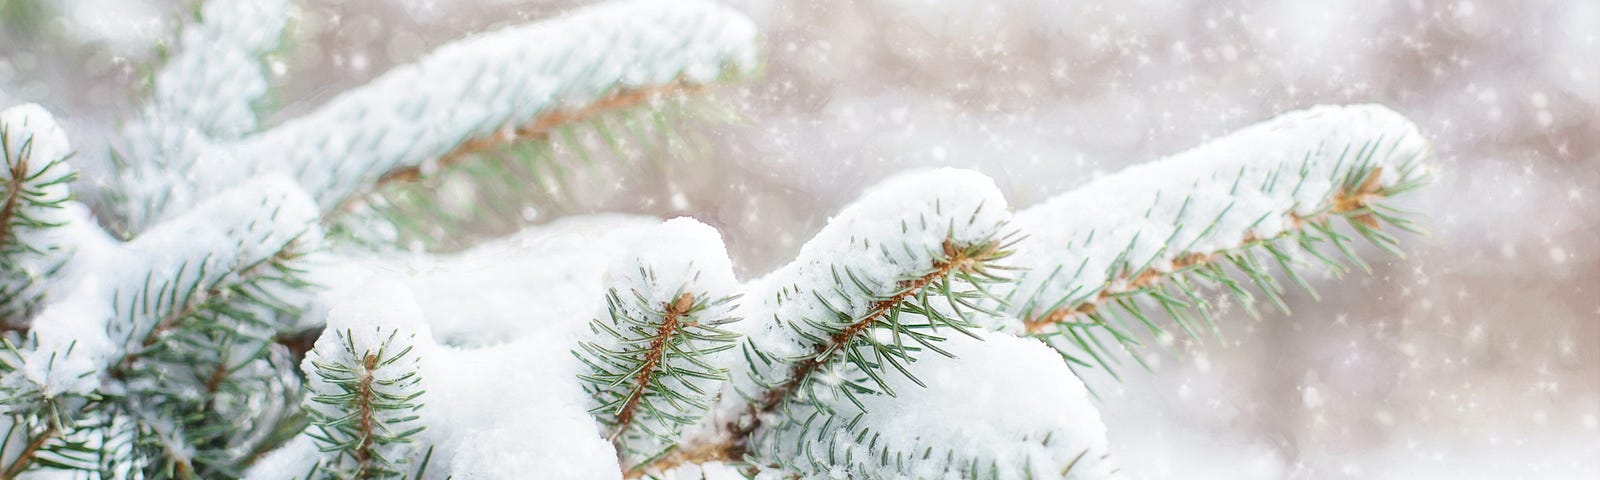 Snow falling and covering pine tree